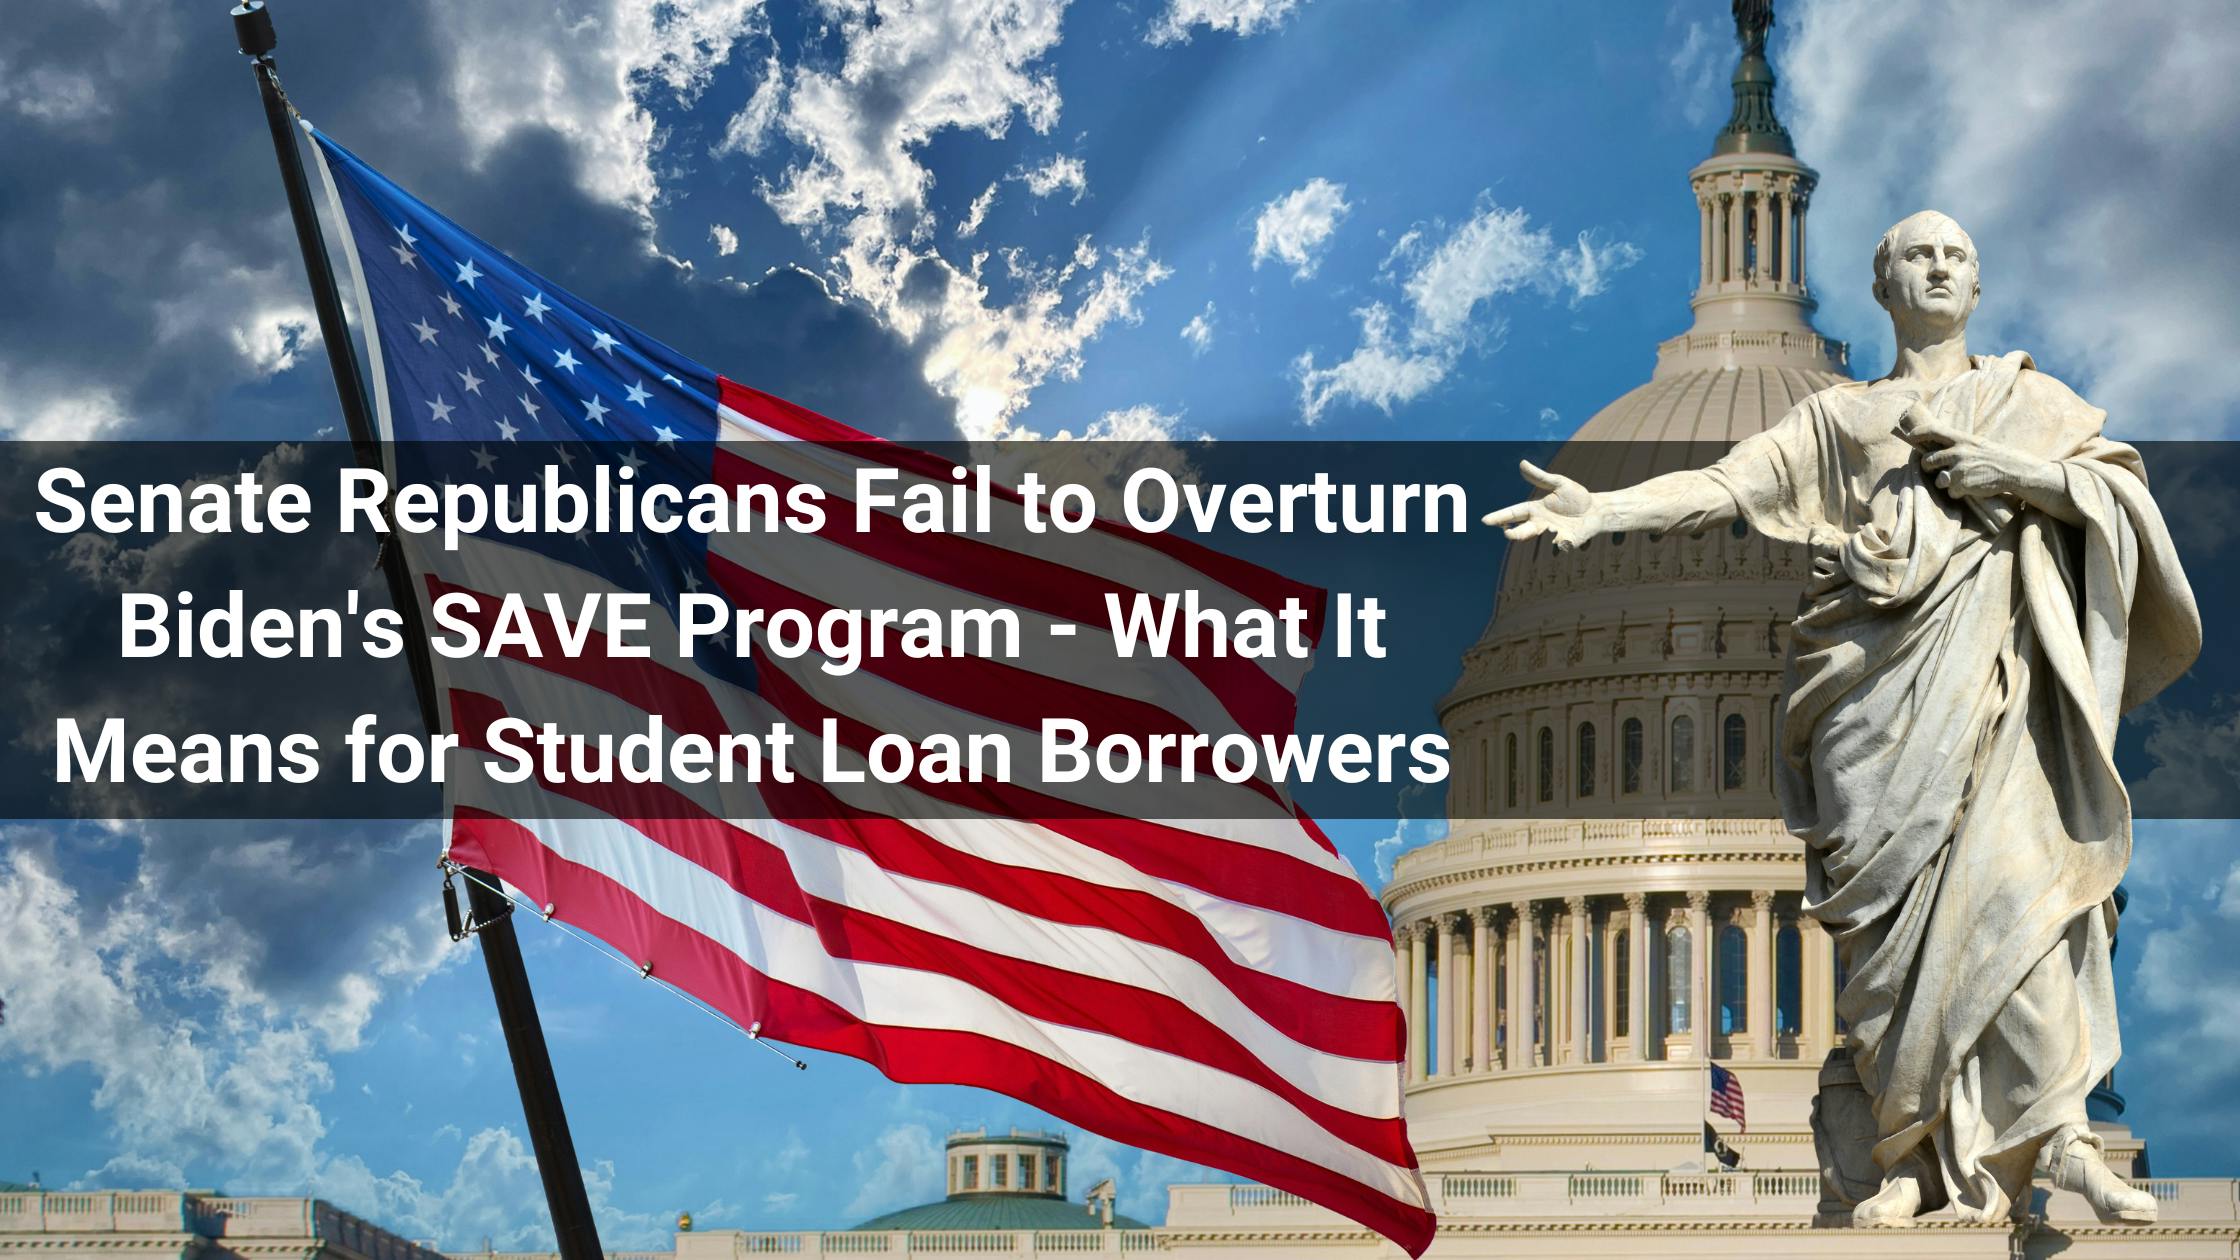 Senate Republicans Fail to Overturn Biden's SAVE Program - What It Means for Student Loan Borrowers